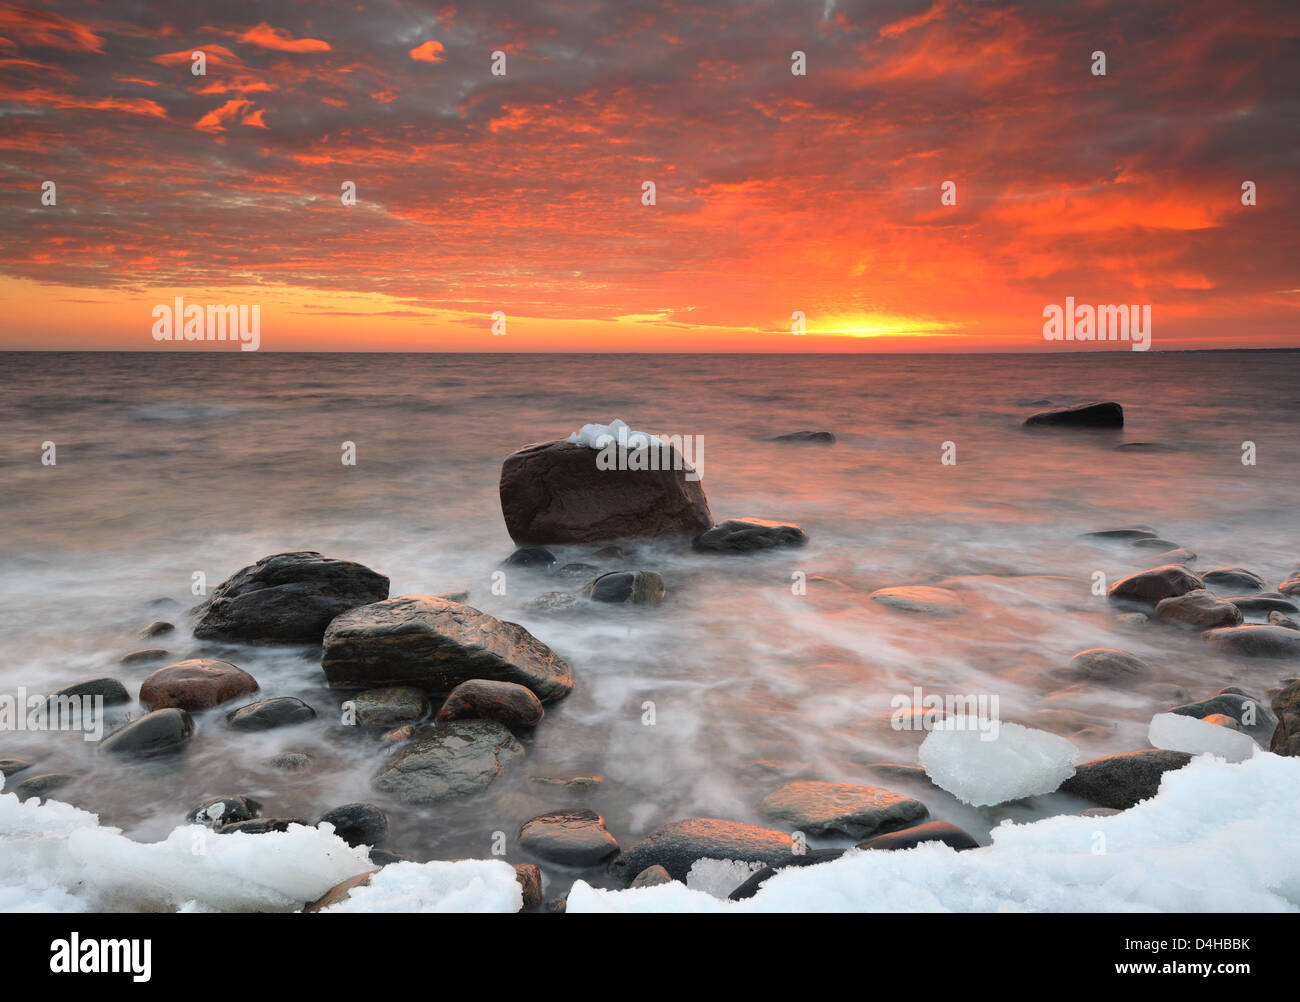 Seascape with rocks and ice at sunset, Näsbokrok Naturreservat, Halland, Sweden, Europe Stock Photo